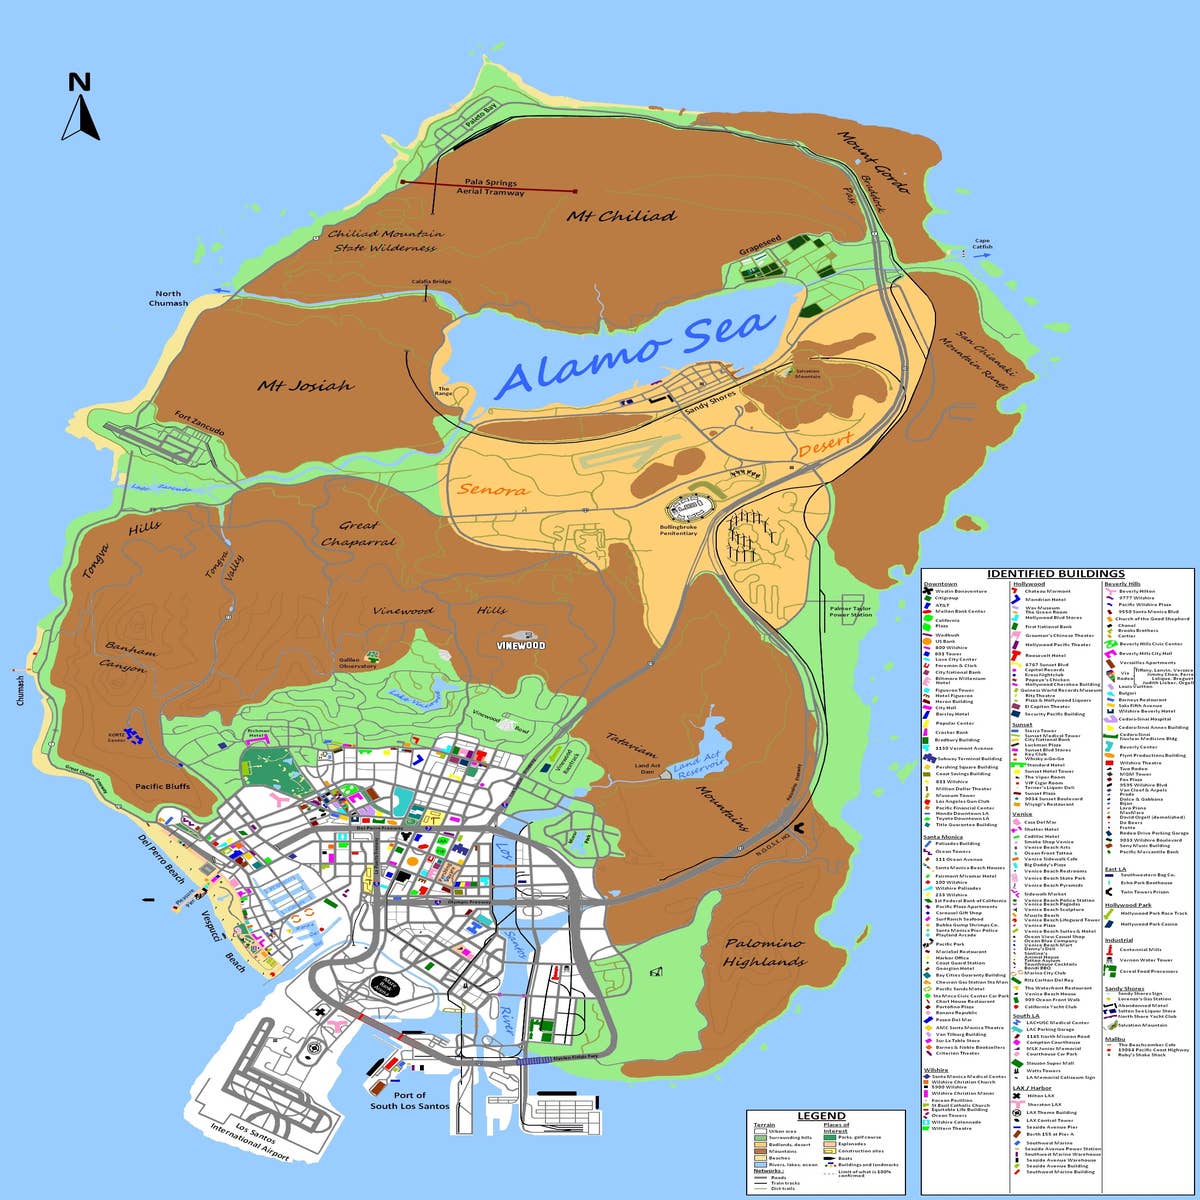 Is this the official GTA 5 Los Santos map?